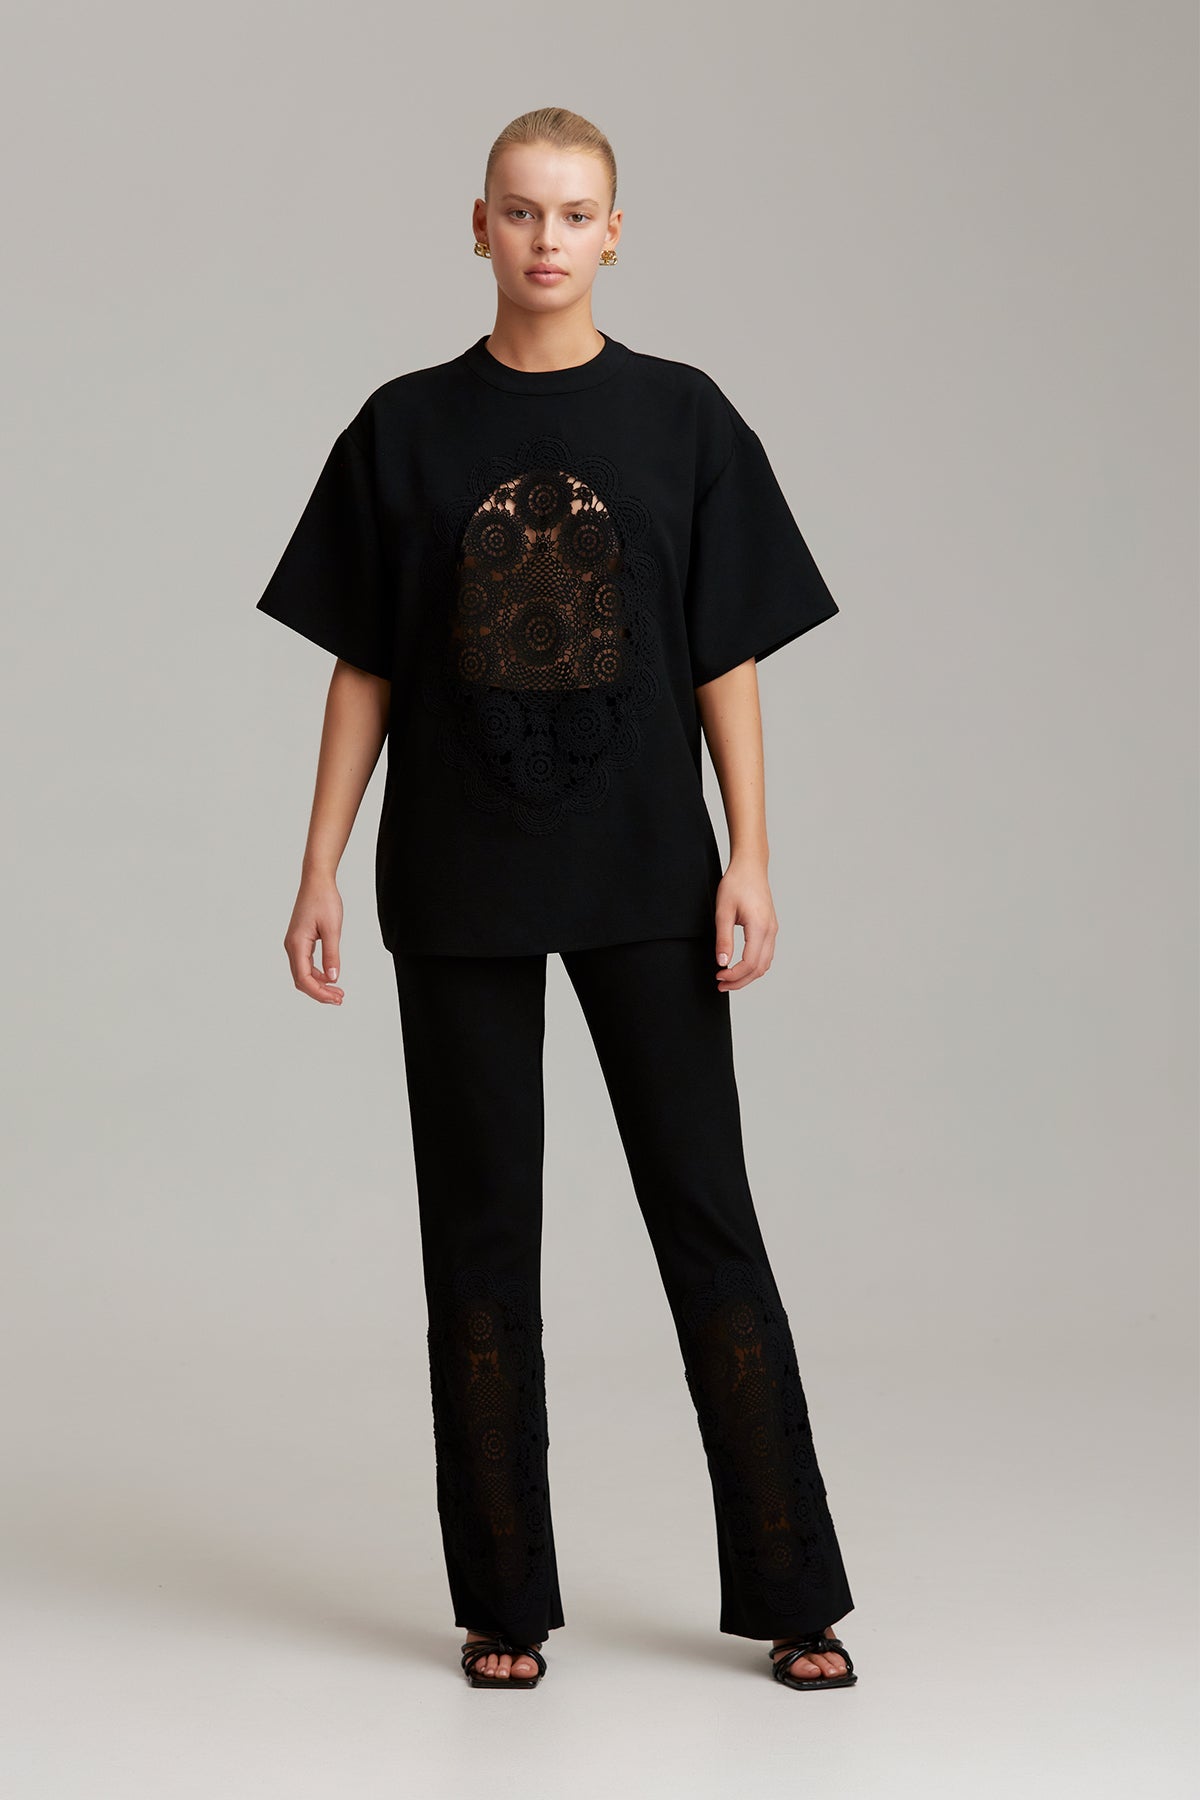 C/MEO Collective - Moments Ago Pant - Black